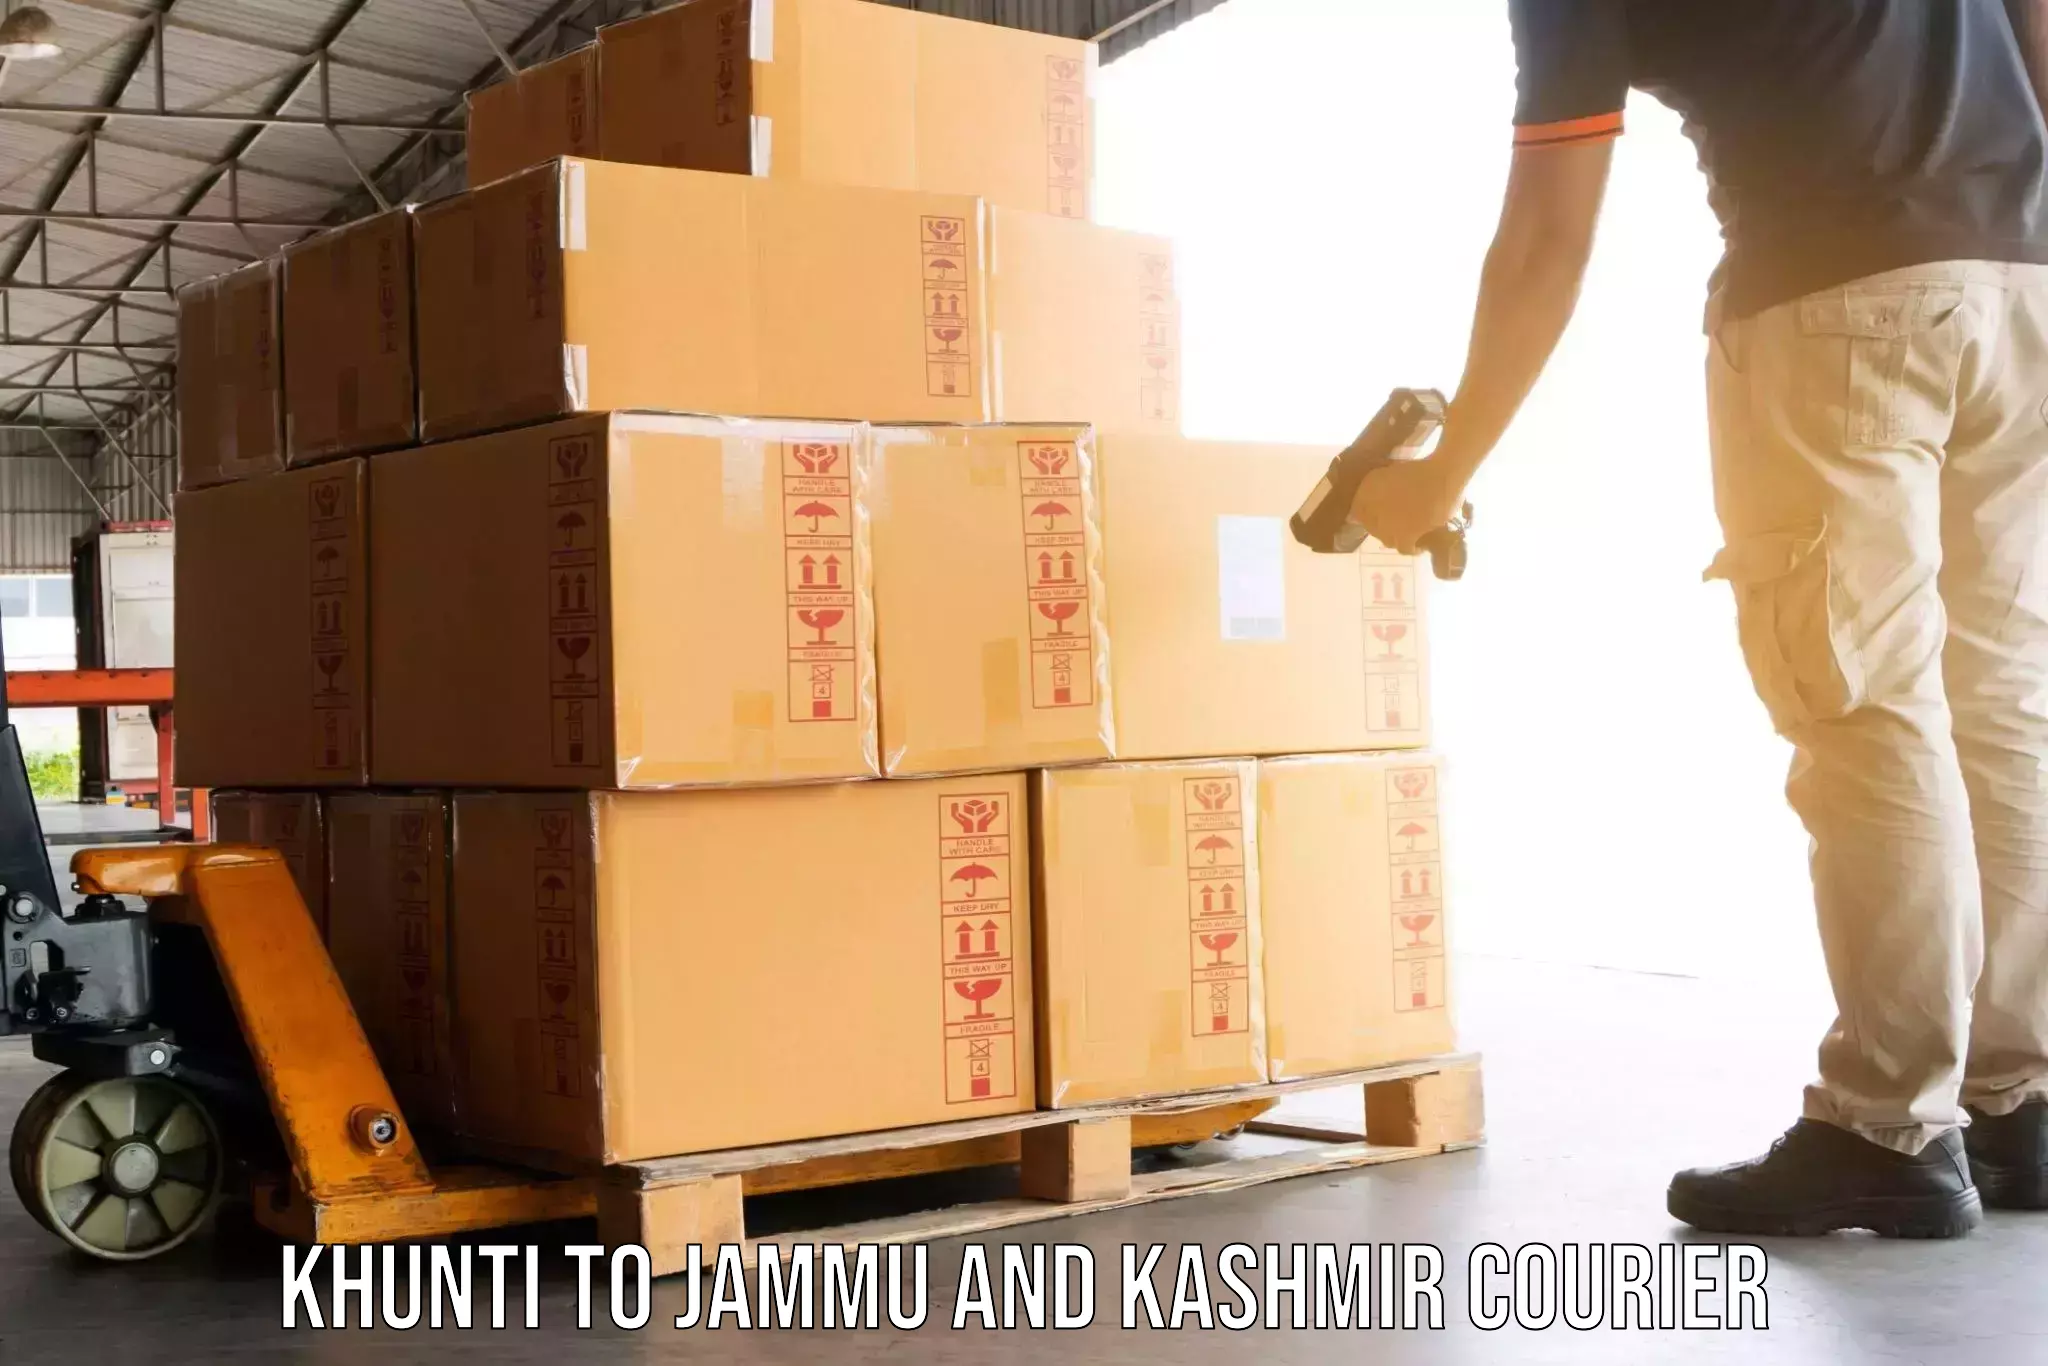 Professional packing services Khunti to Baramulla